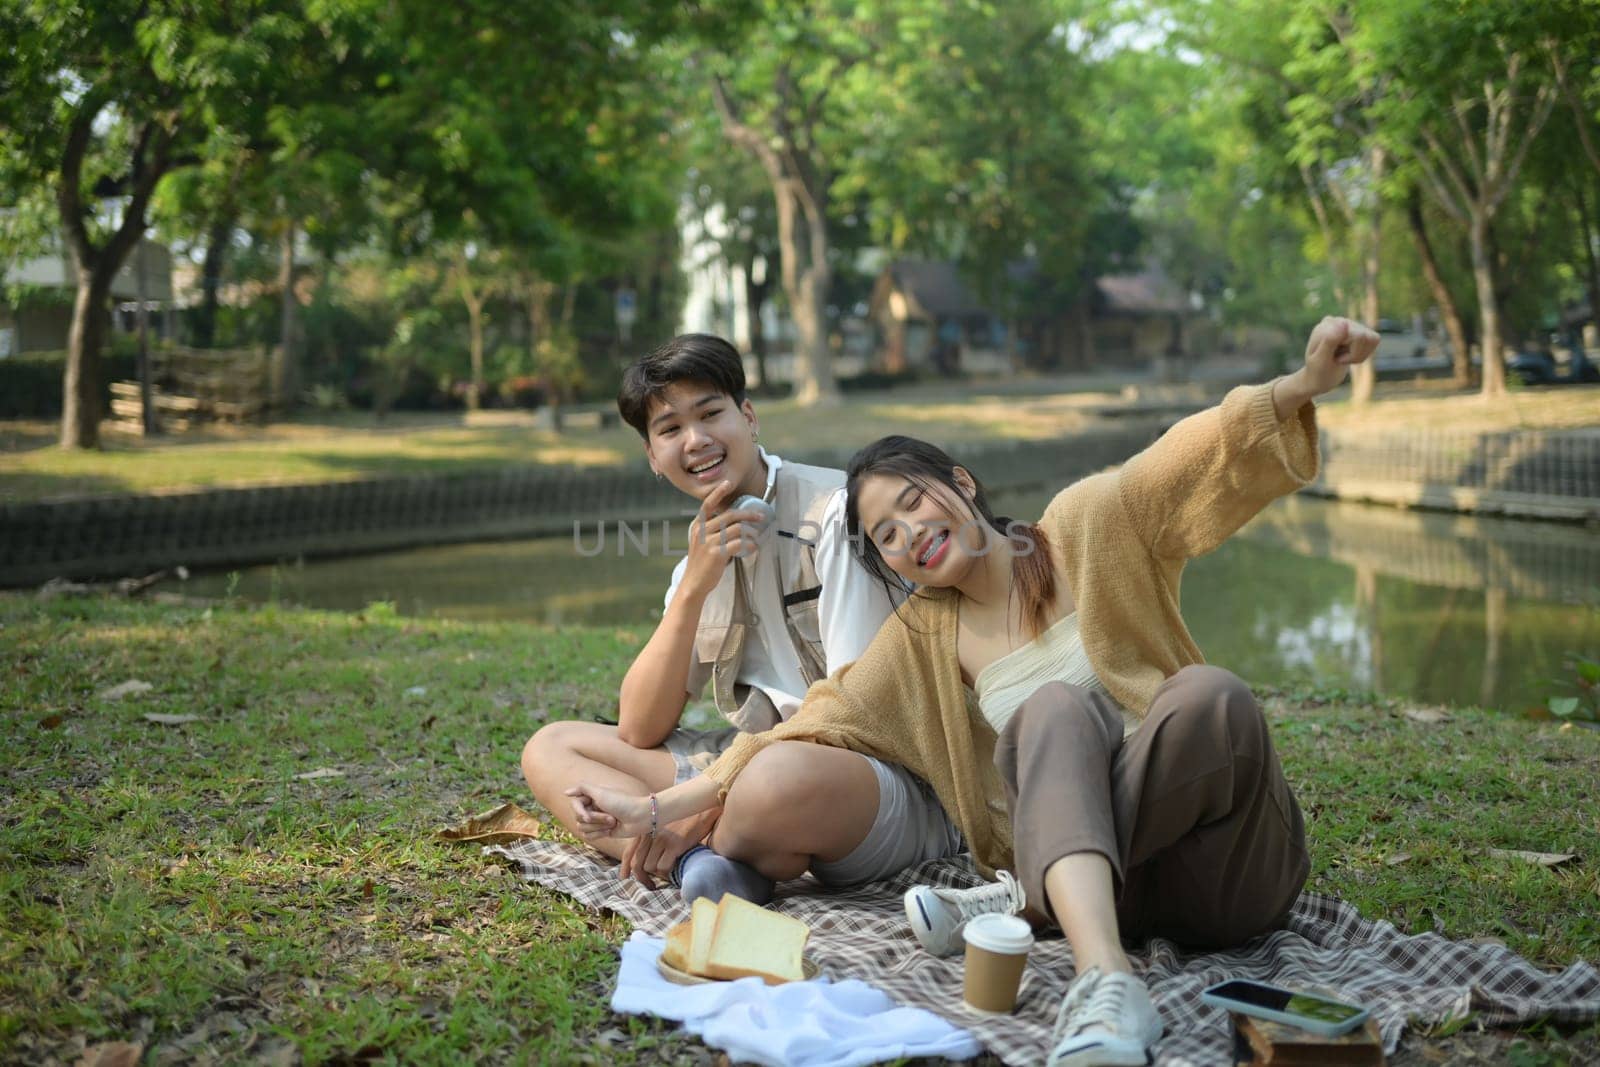 Young beautiful couple laughing, enjoying picnic time on a beautiful sunny day.